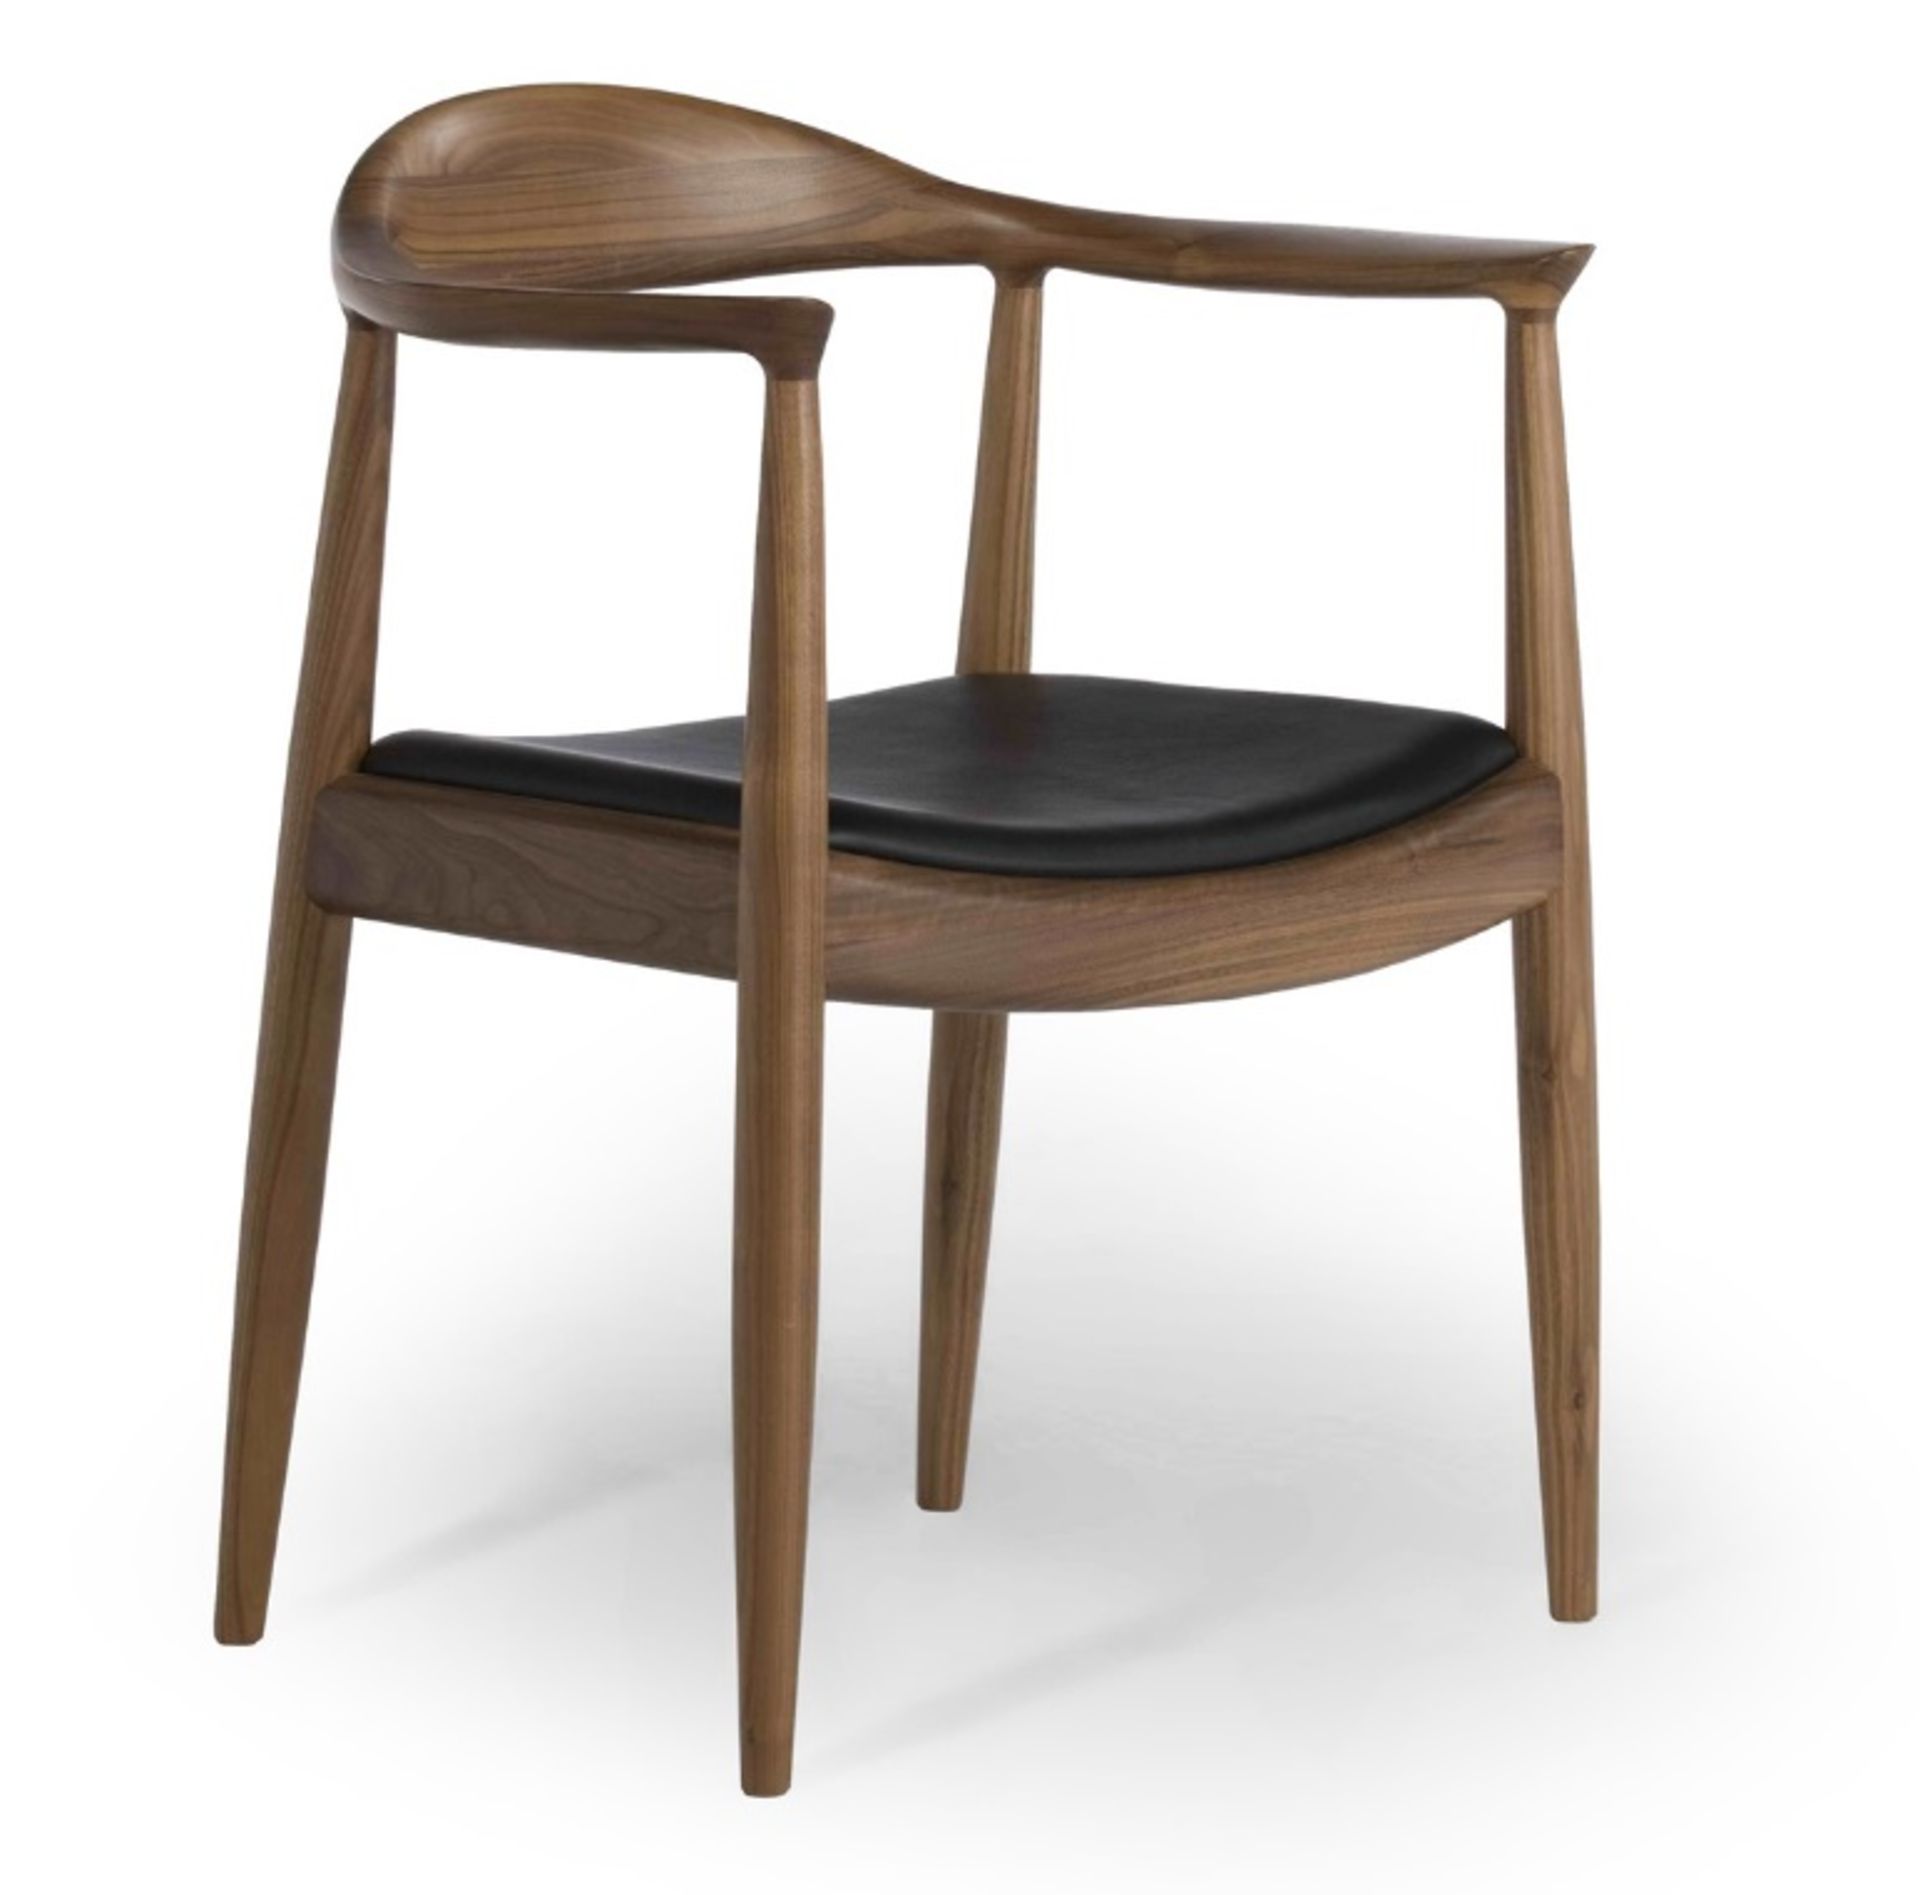 4 x Hans-j Wegner Inspired Dining Chairs In Walnut - New & Boxed- CL508 - Location: Altrincham WA14